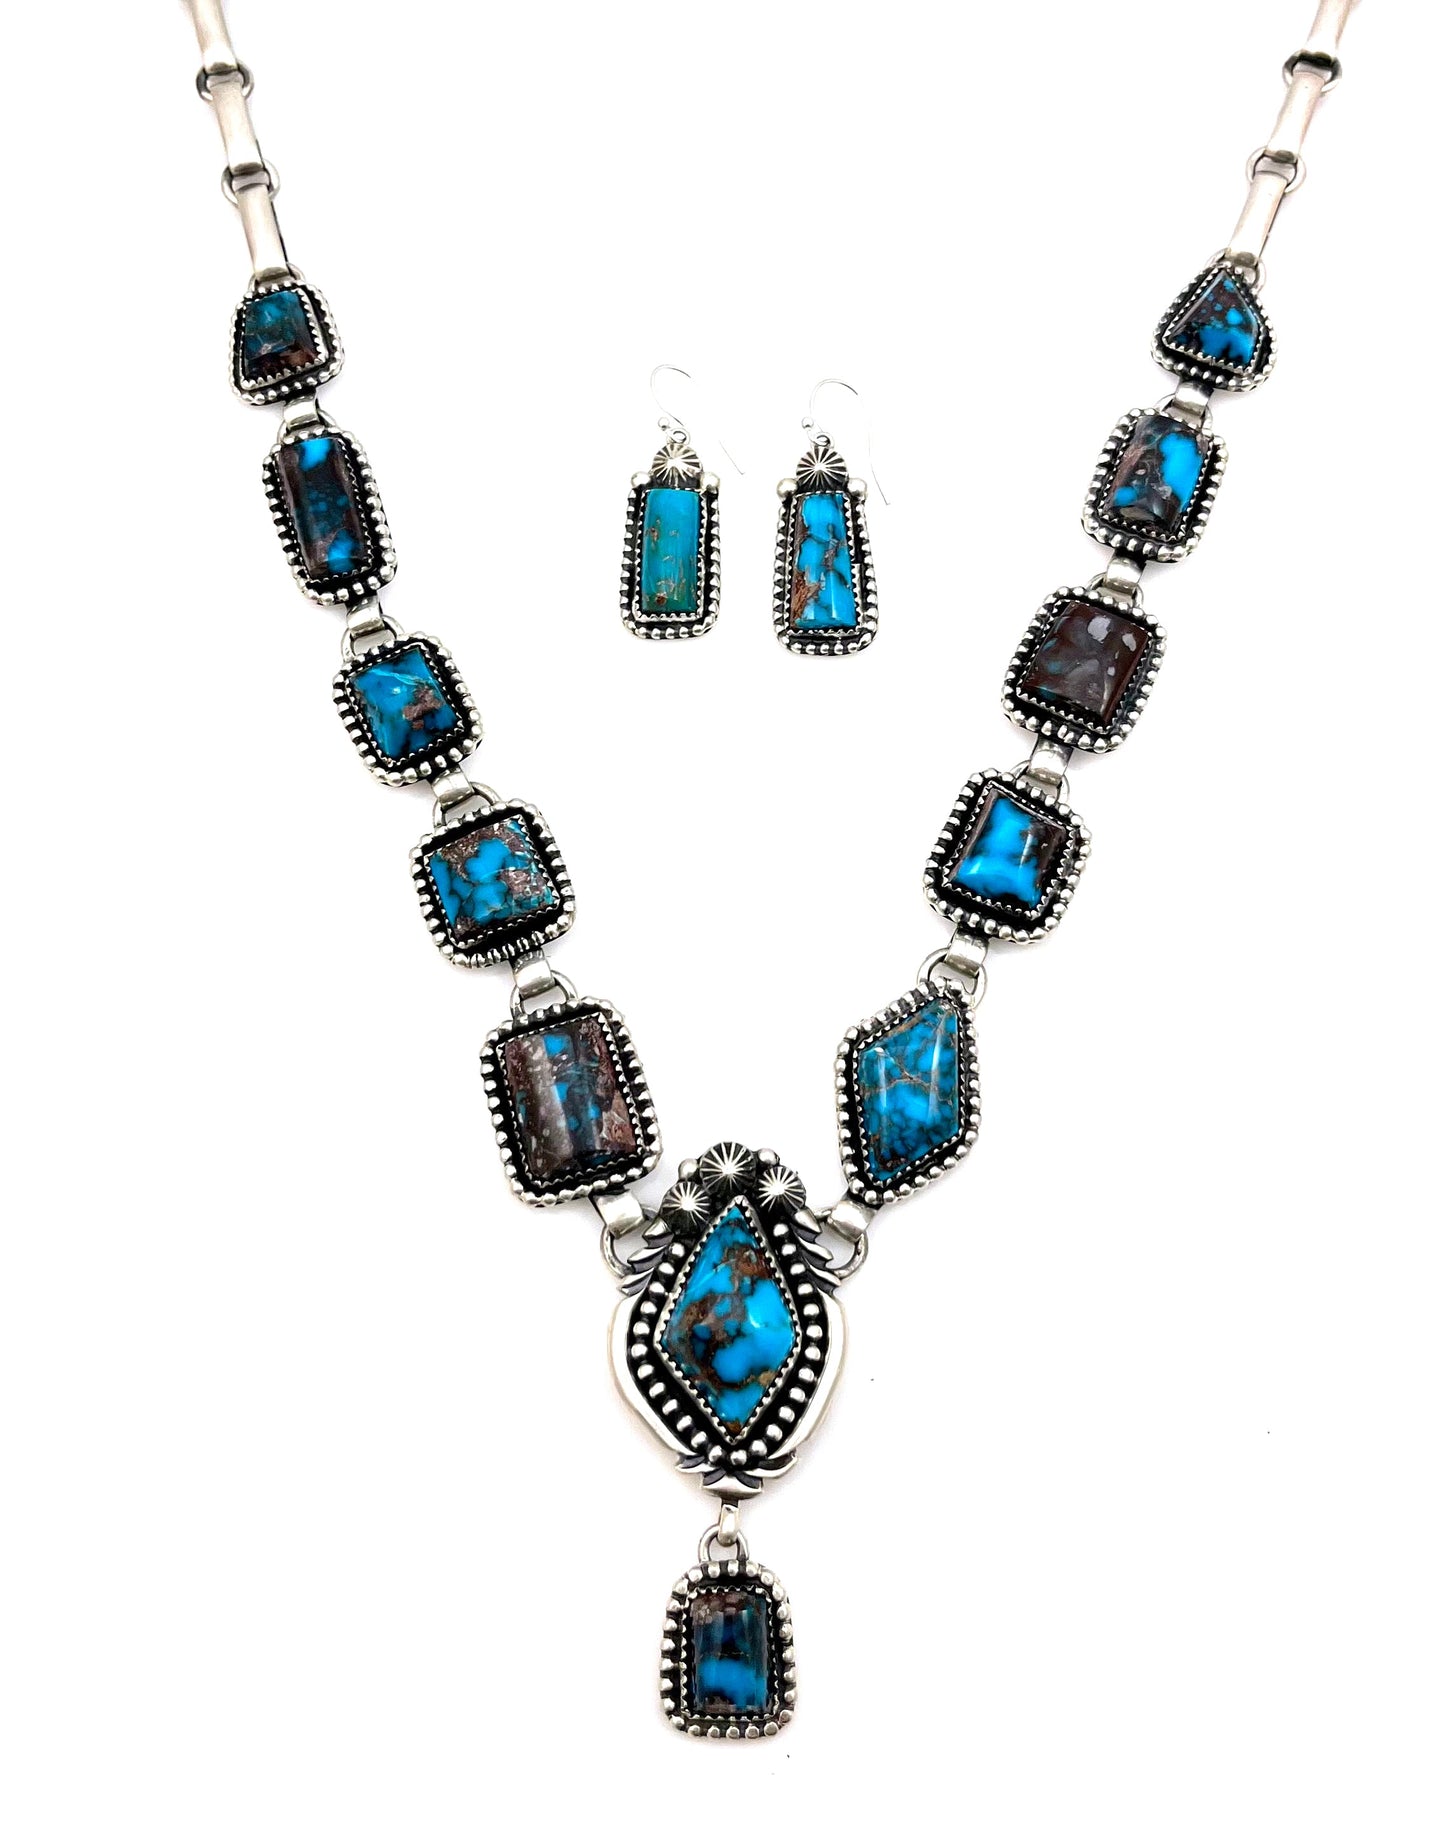 Bisbee Turquoise Necklace and Earrings Set-Jewelry-Jeanette Dale-Sorrel Sky Gallery